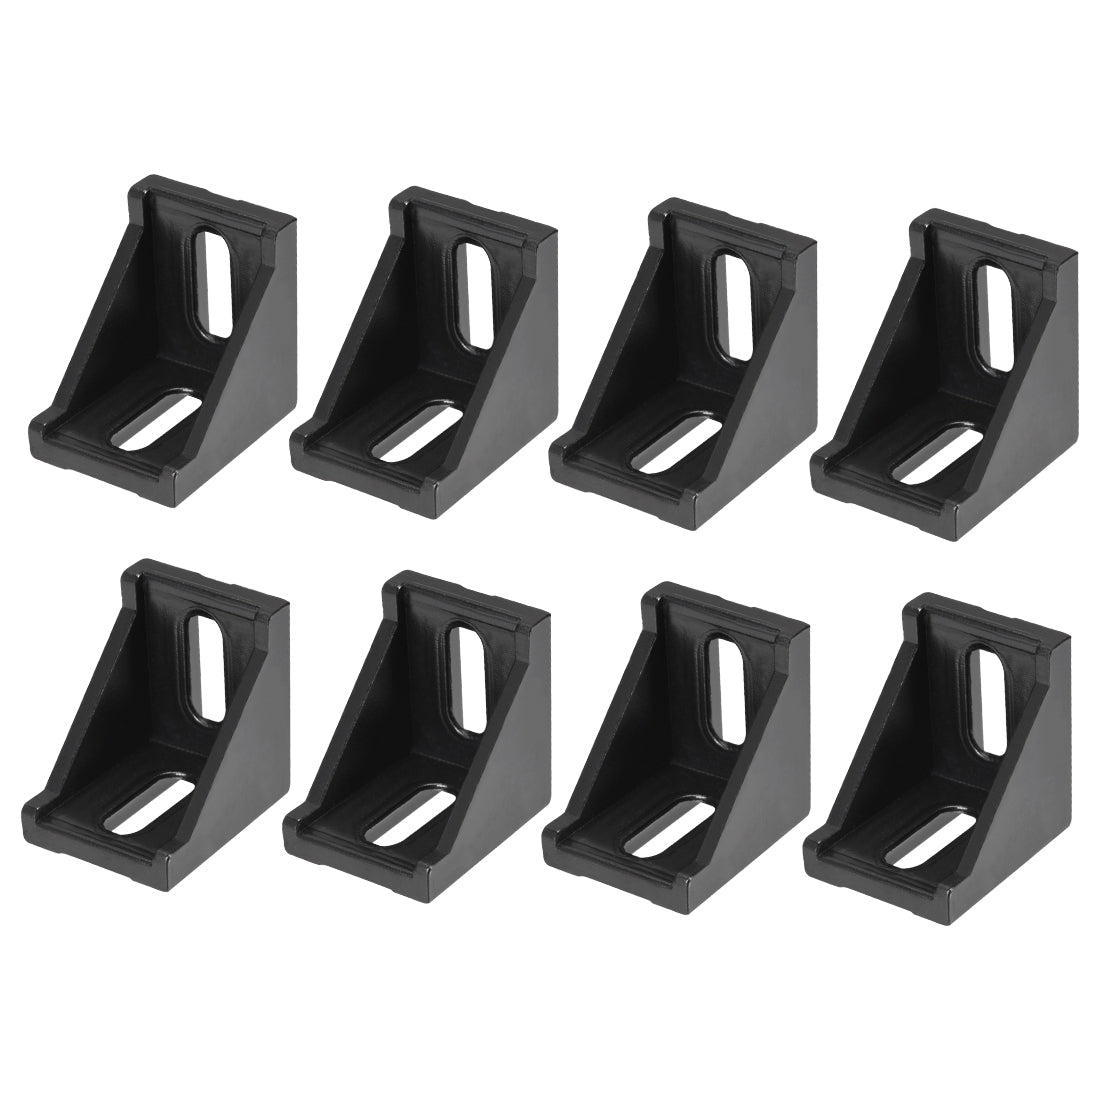 uxcell Uxcell Inside Corner Bracket Gusset, 35mm x 35mm for 3030 Series Aluminum Extrusion Profile with Slot 8mm, 8 Pcs (Black)